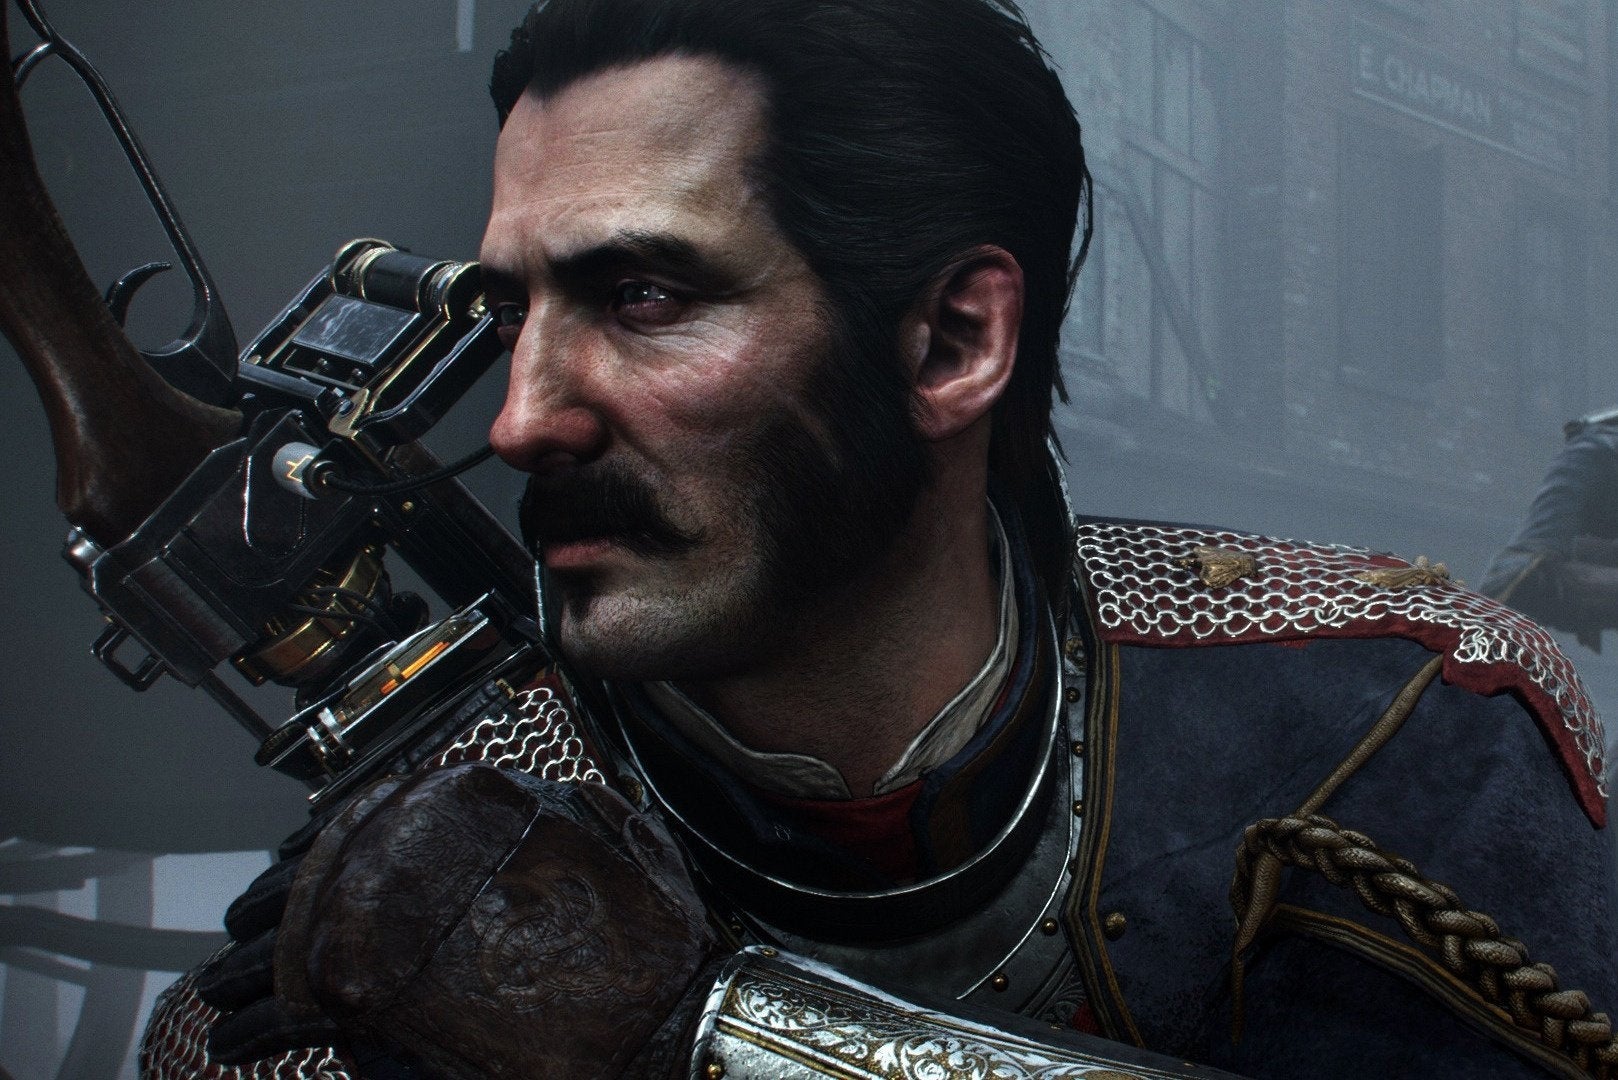 The order на пк. The order: 1886. Игра орден 1886. Order 1886 ps4. The order 1886 Gameplay.